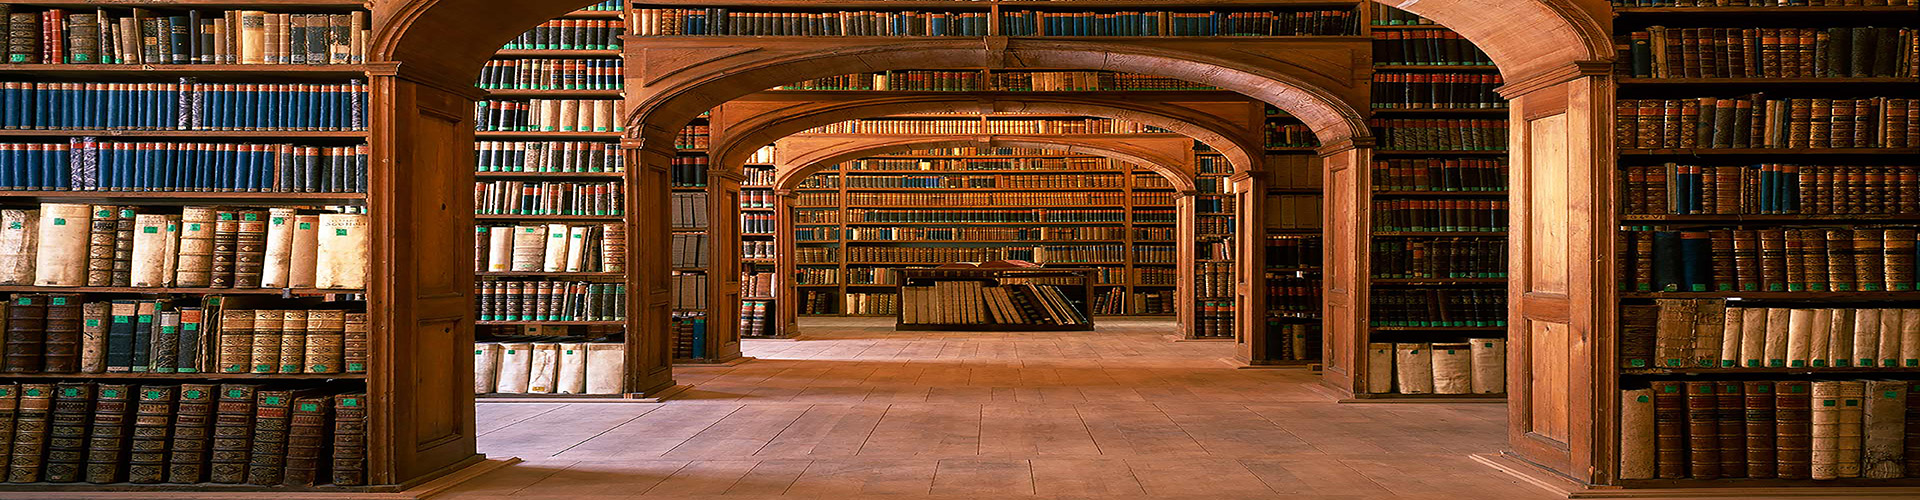 A Library Image showing rows of books